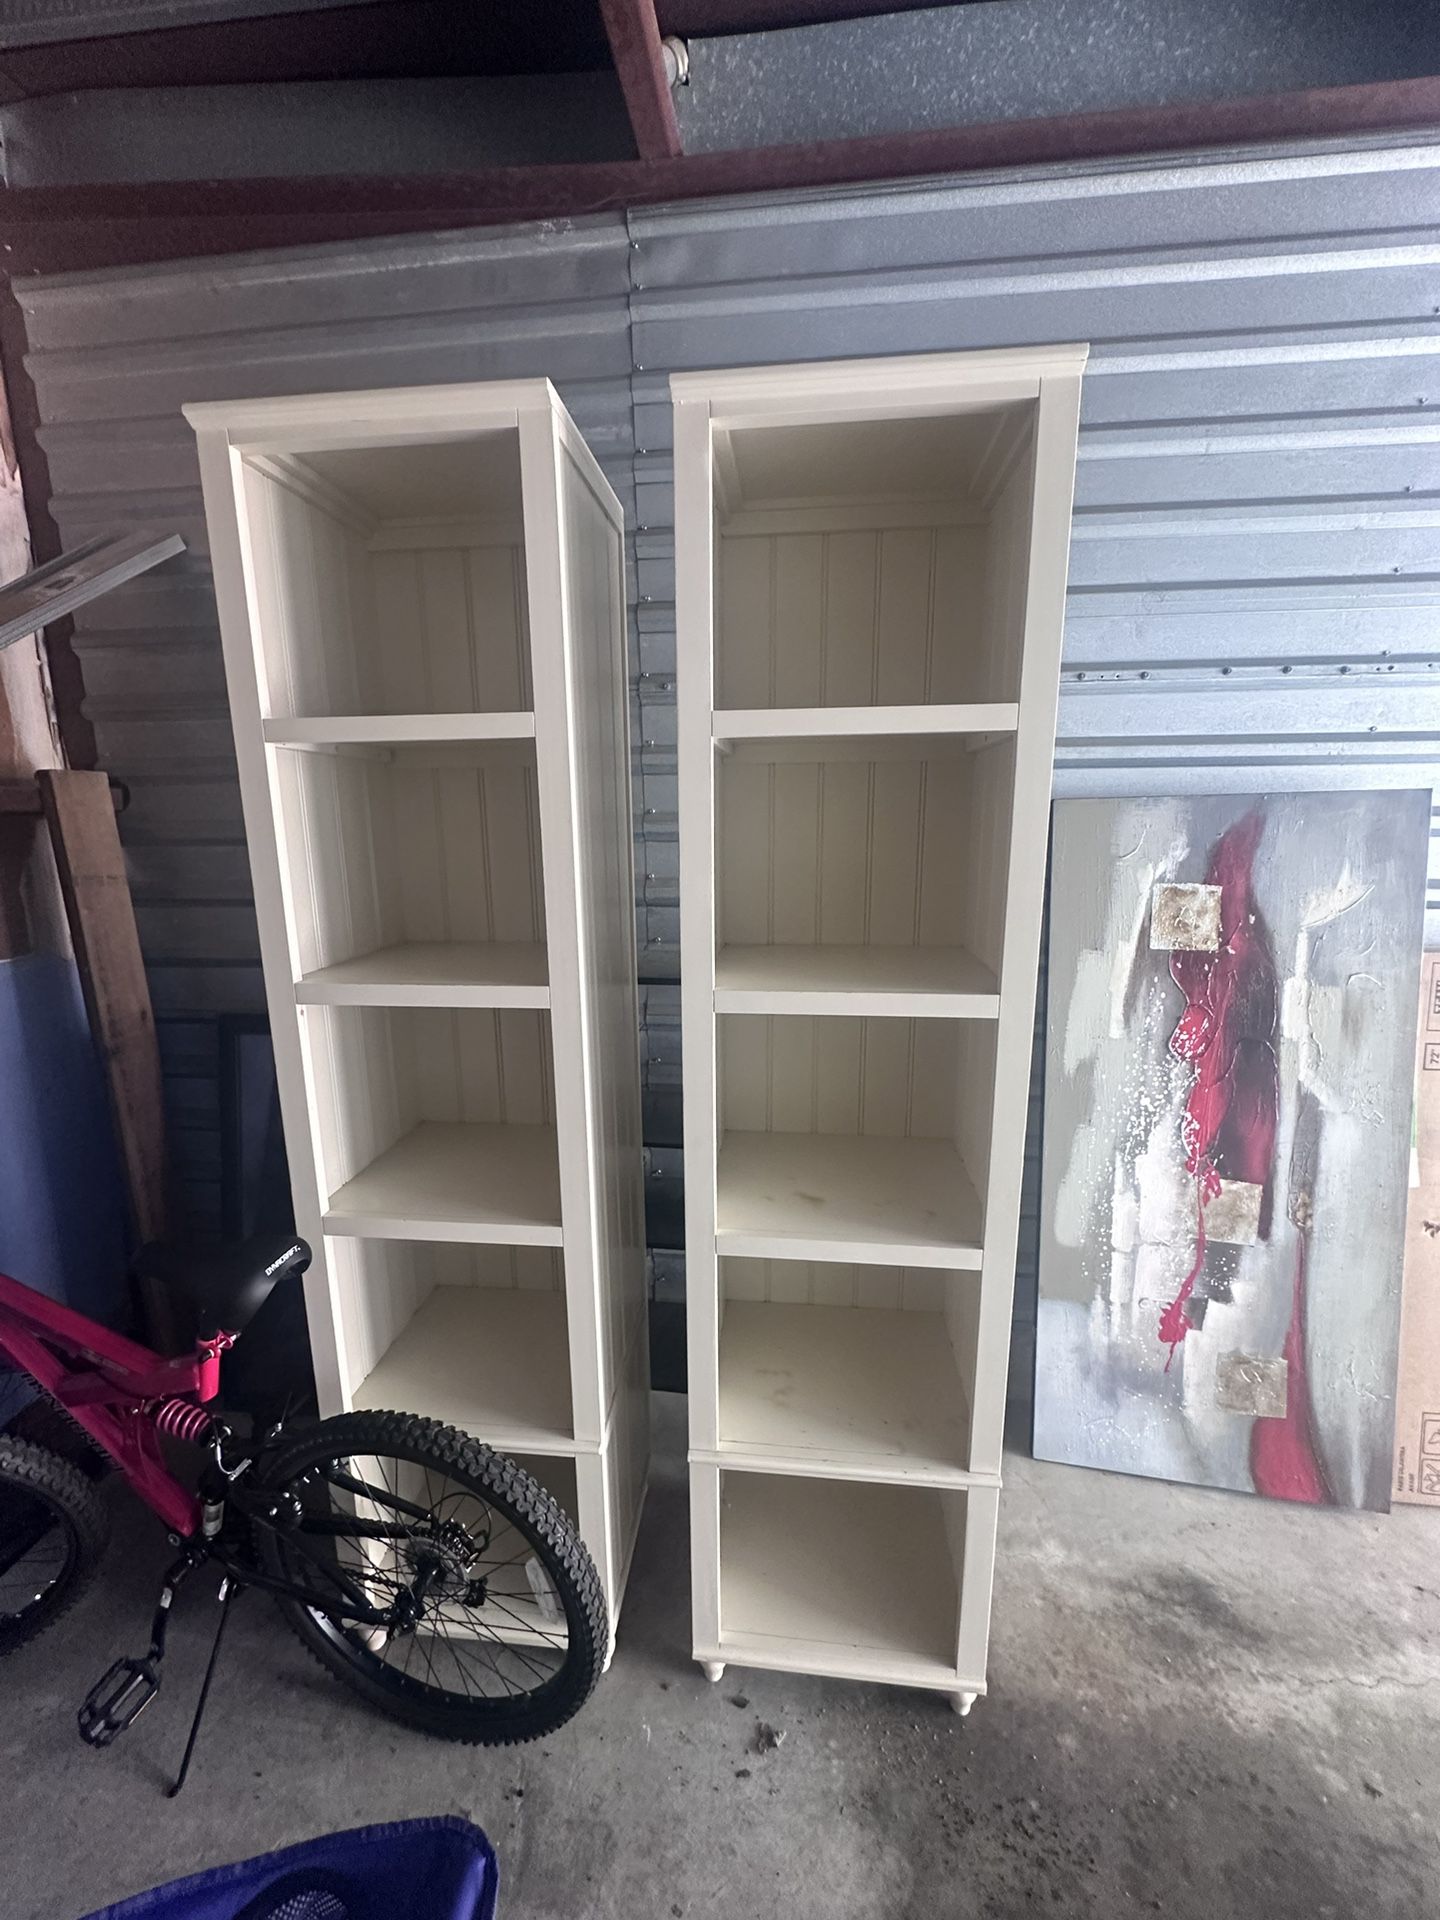 Two 5 Tier Wooden Shelves